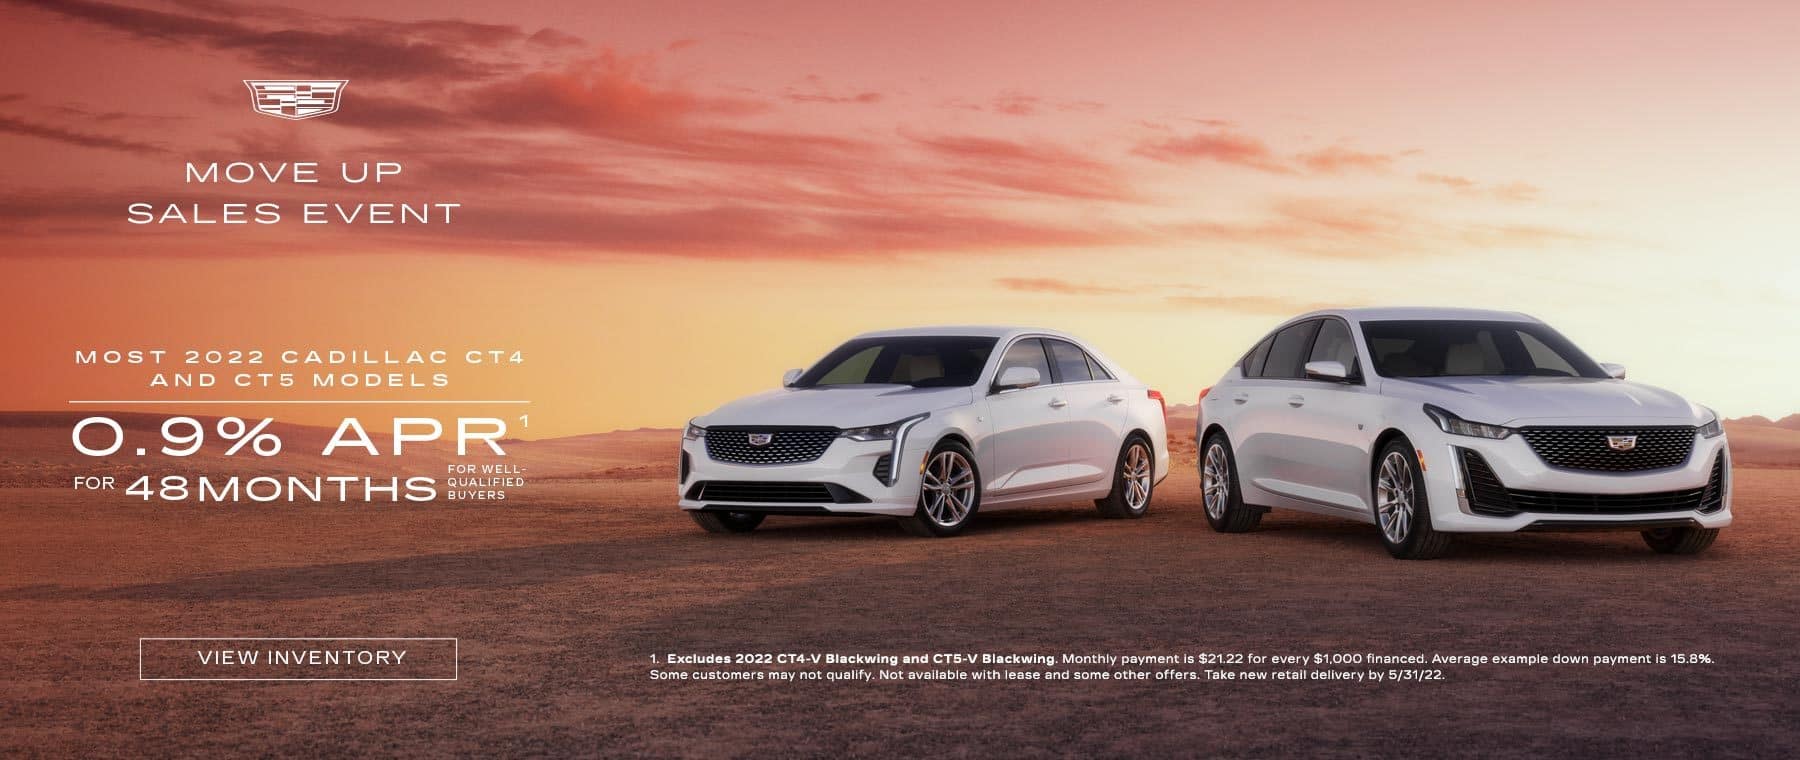 2022 Cadillac CT4 and CT5. 0.9% for 48 months for well-qualified buyers.